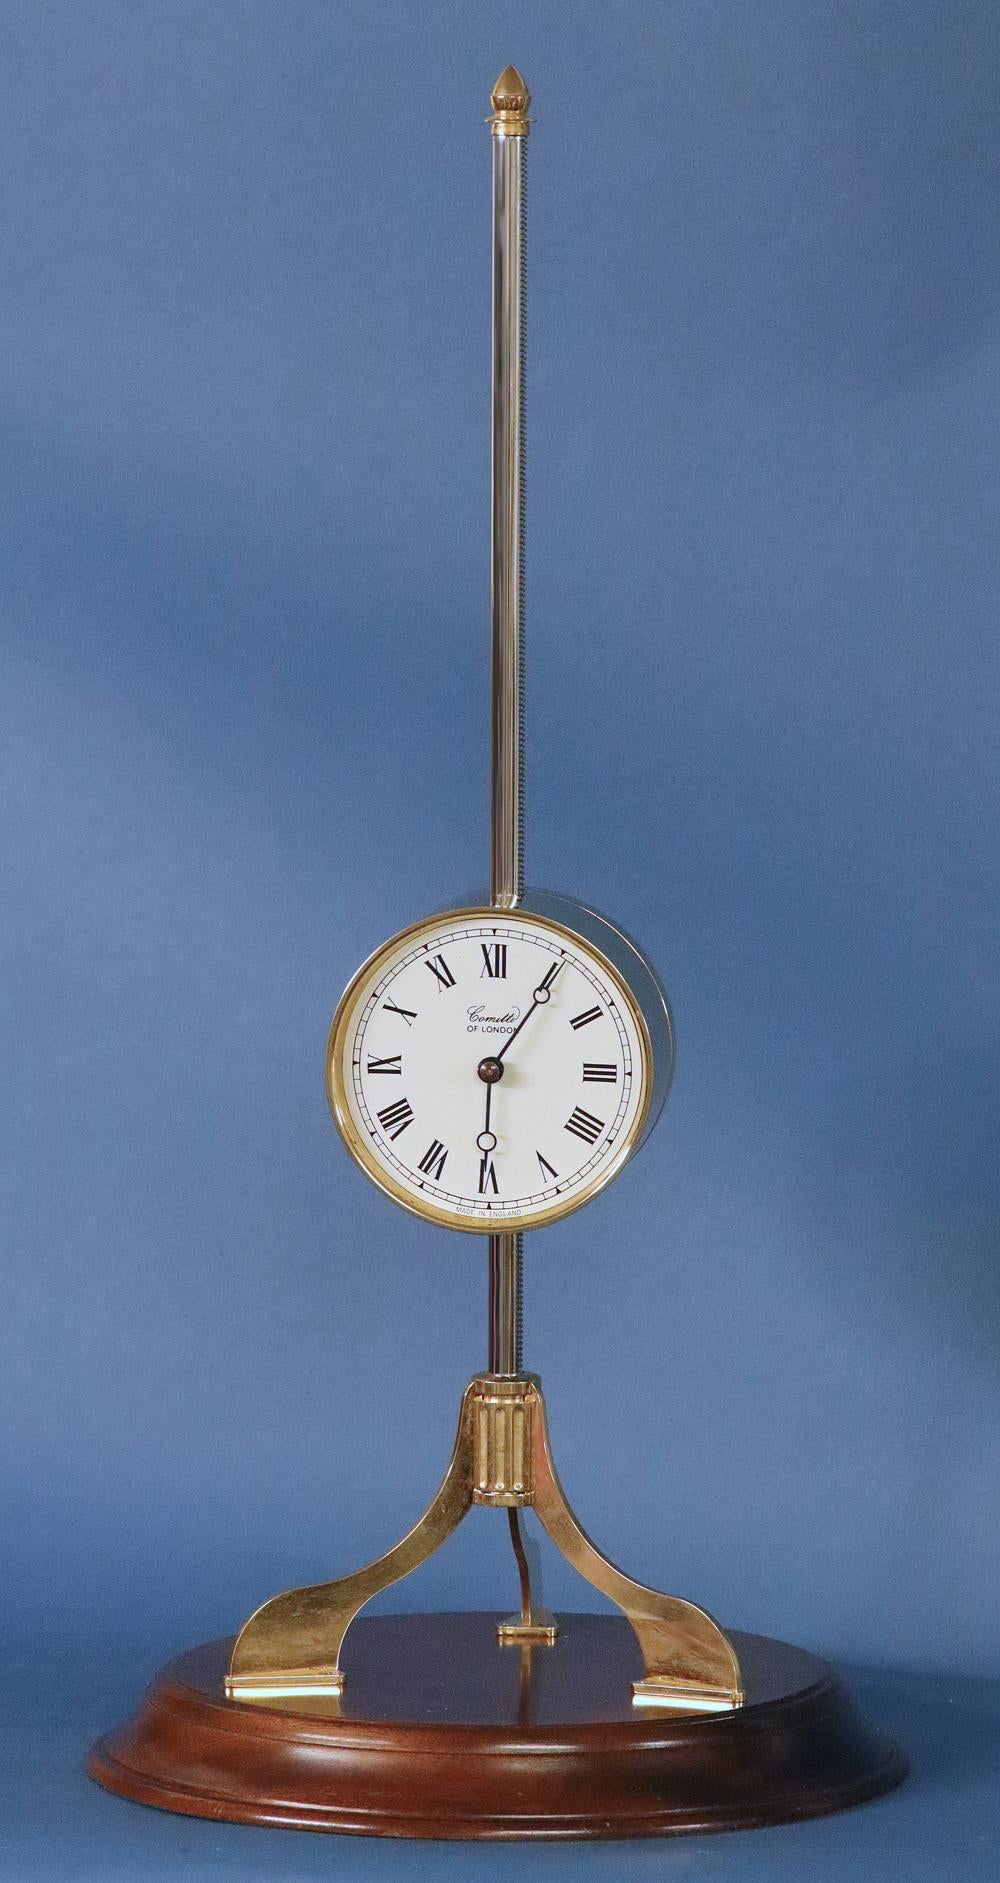 Maker: 
Comitti of London

Case: 
The cylindrical clock is suspended on a stand that sits on three legs and has a steel rod with a sawtooth edge. The whole is mounted to a Mohagany base.

Dial: 
The white dial has Roman numerals for the